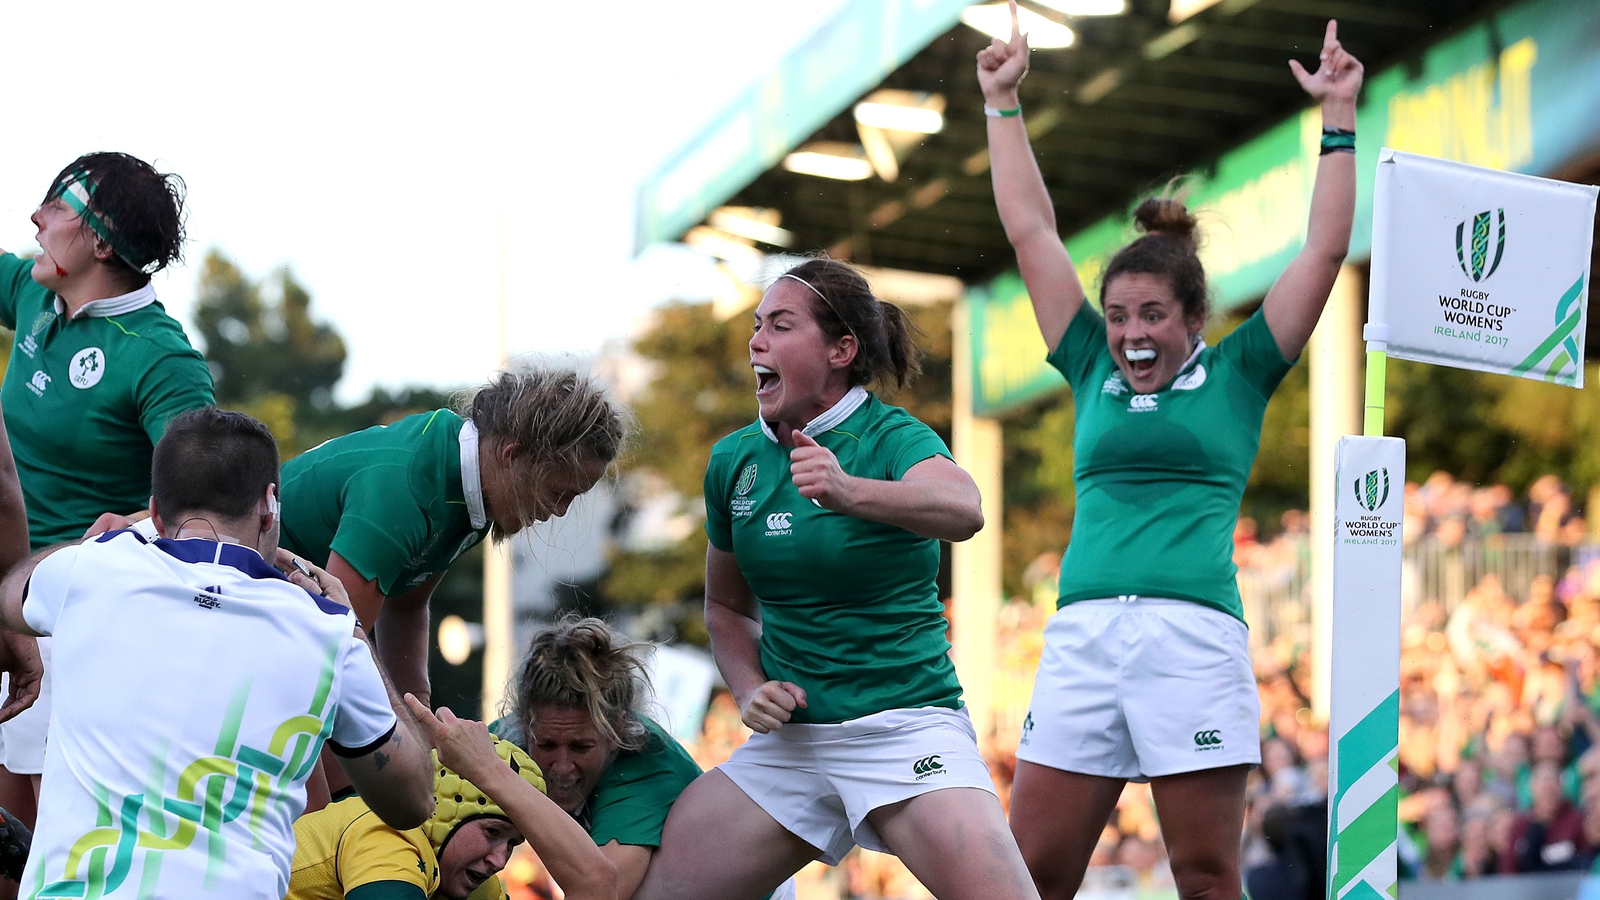 Women's Rugby World Cup Tables, Fixtures and Results